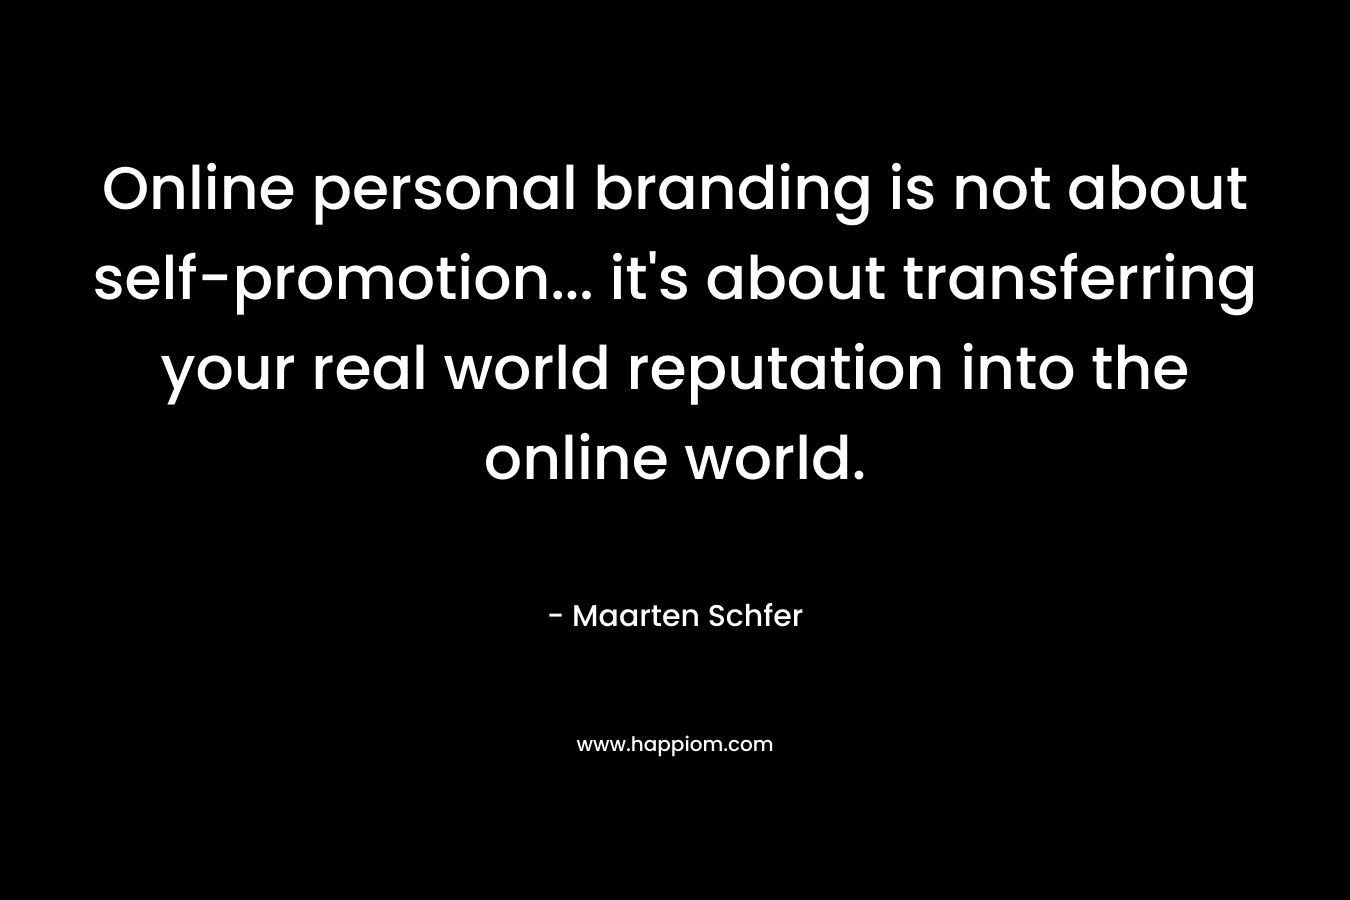 Online personal branding is not about self-promotion... it's about transferring your real world reputation into the online world.